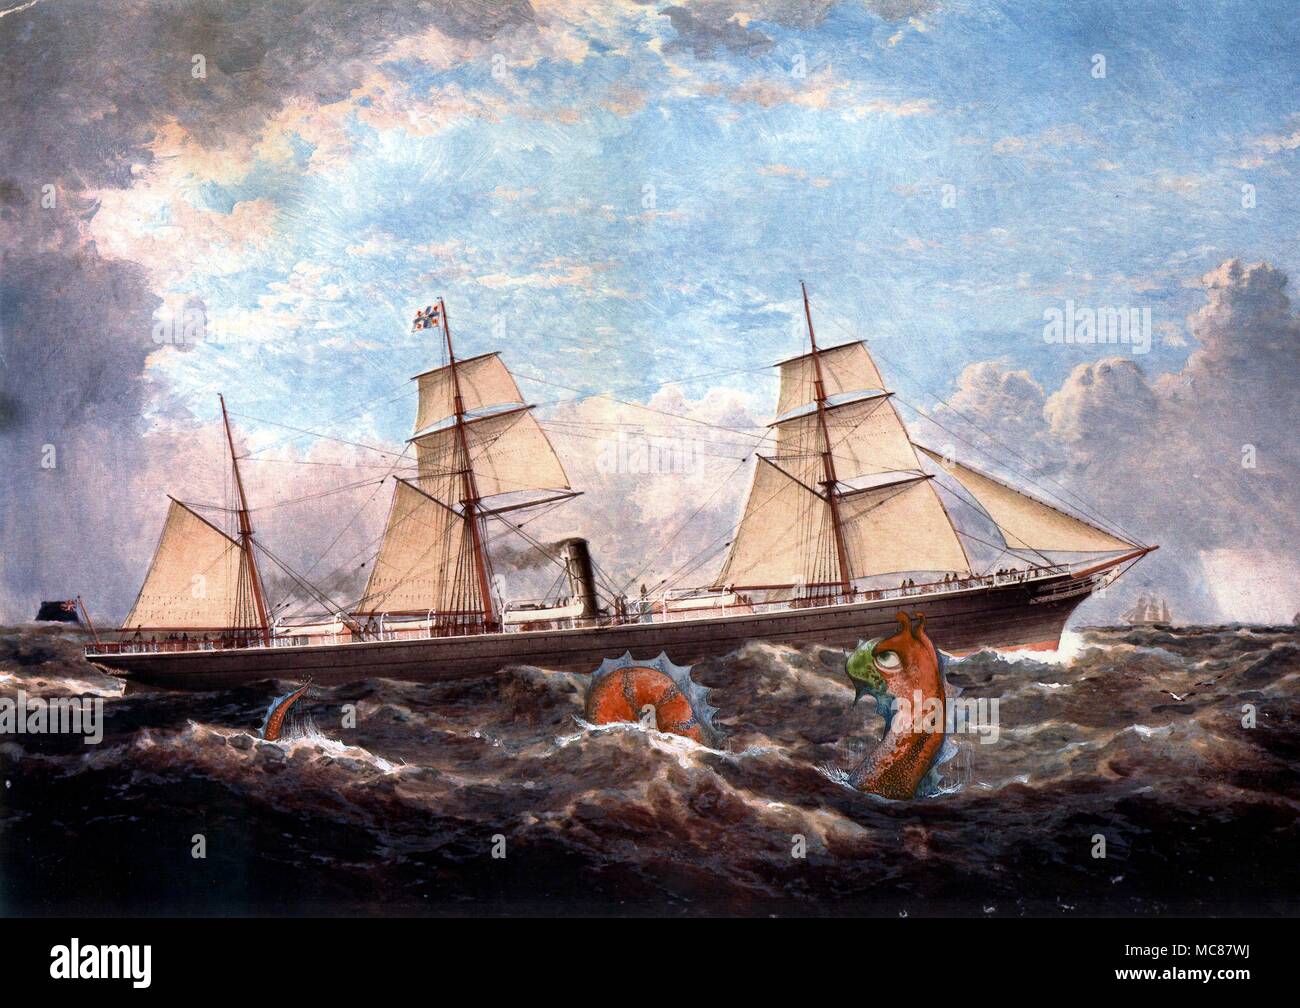 Sea Monsters Sea monster with old sailing ship Stock Photo